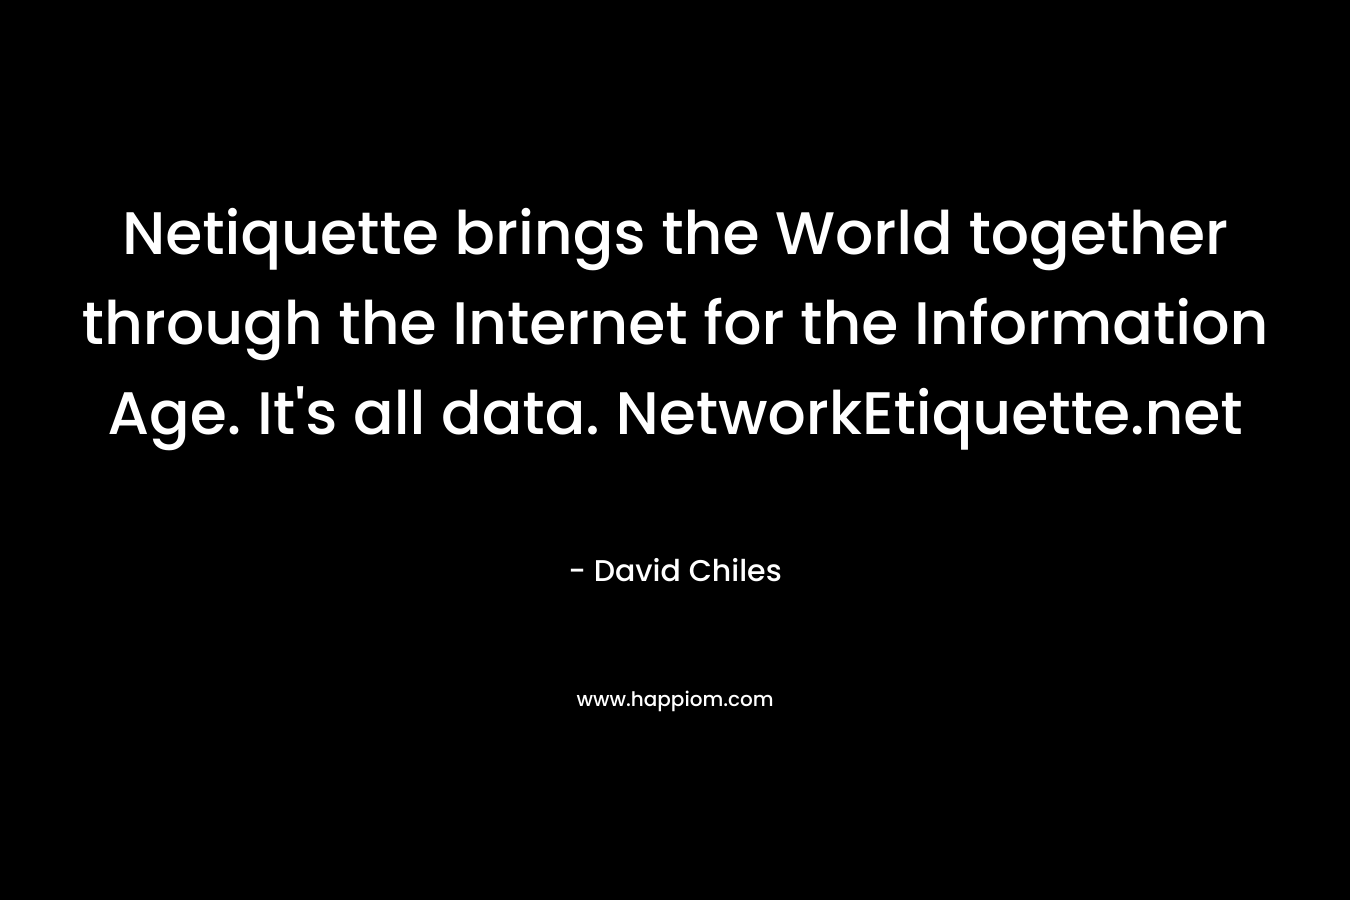 Netiquette brings the World together through the Internet for the Information Age. It's all data. NetworkEtiquette.net